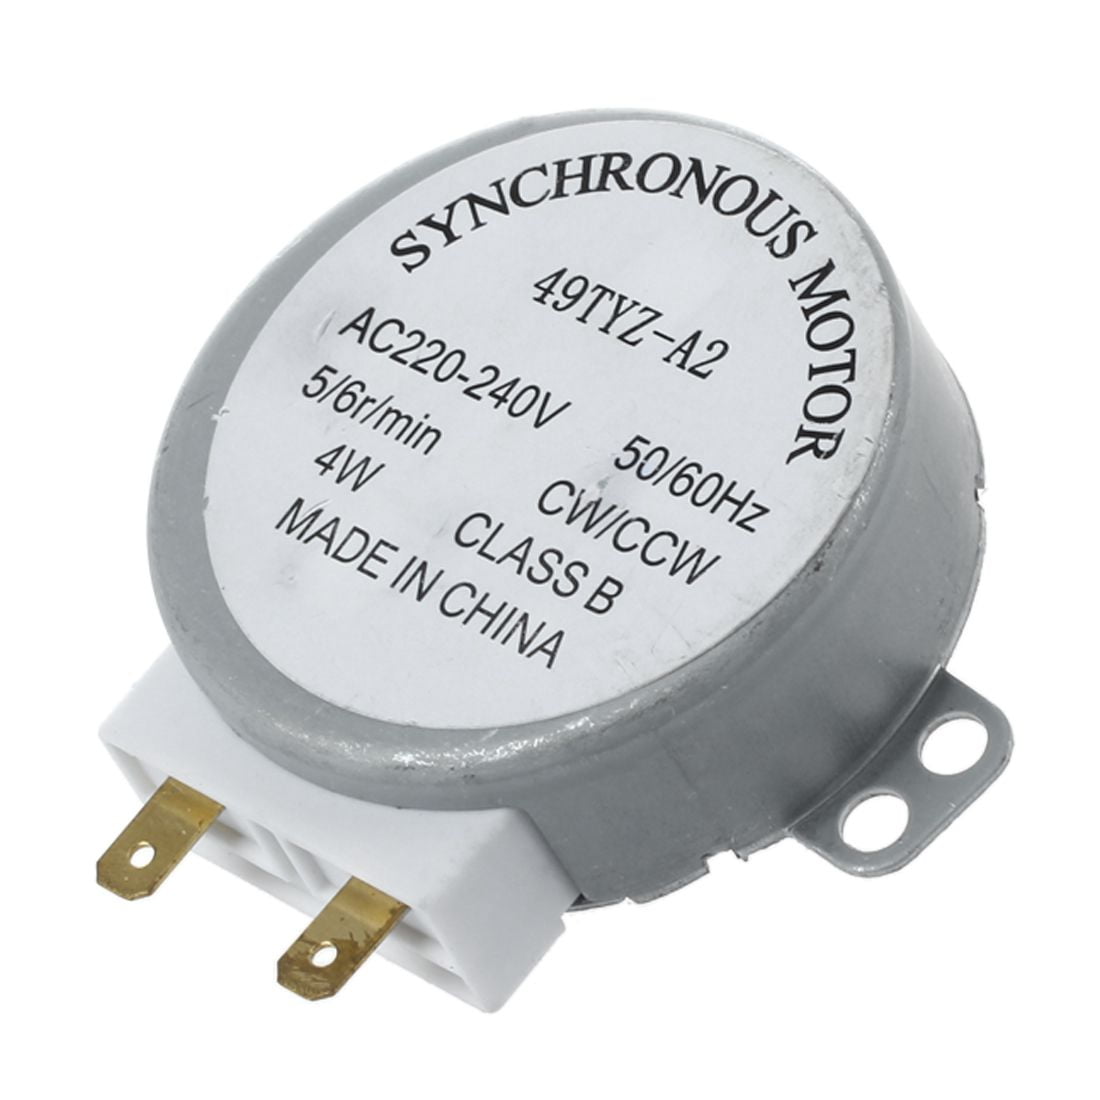 Microwave Oven Turntable Synchronous Motor CW/CCW 4W 5/6RPM AC 220-240V 